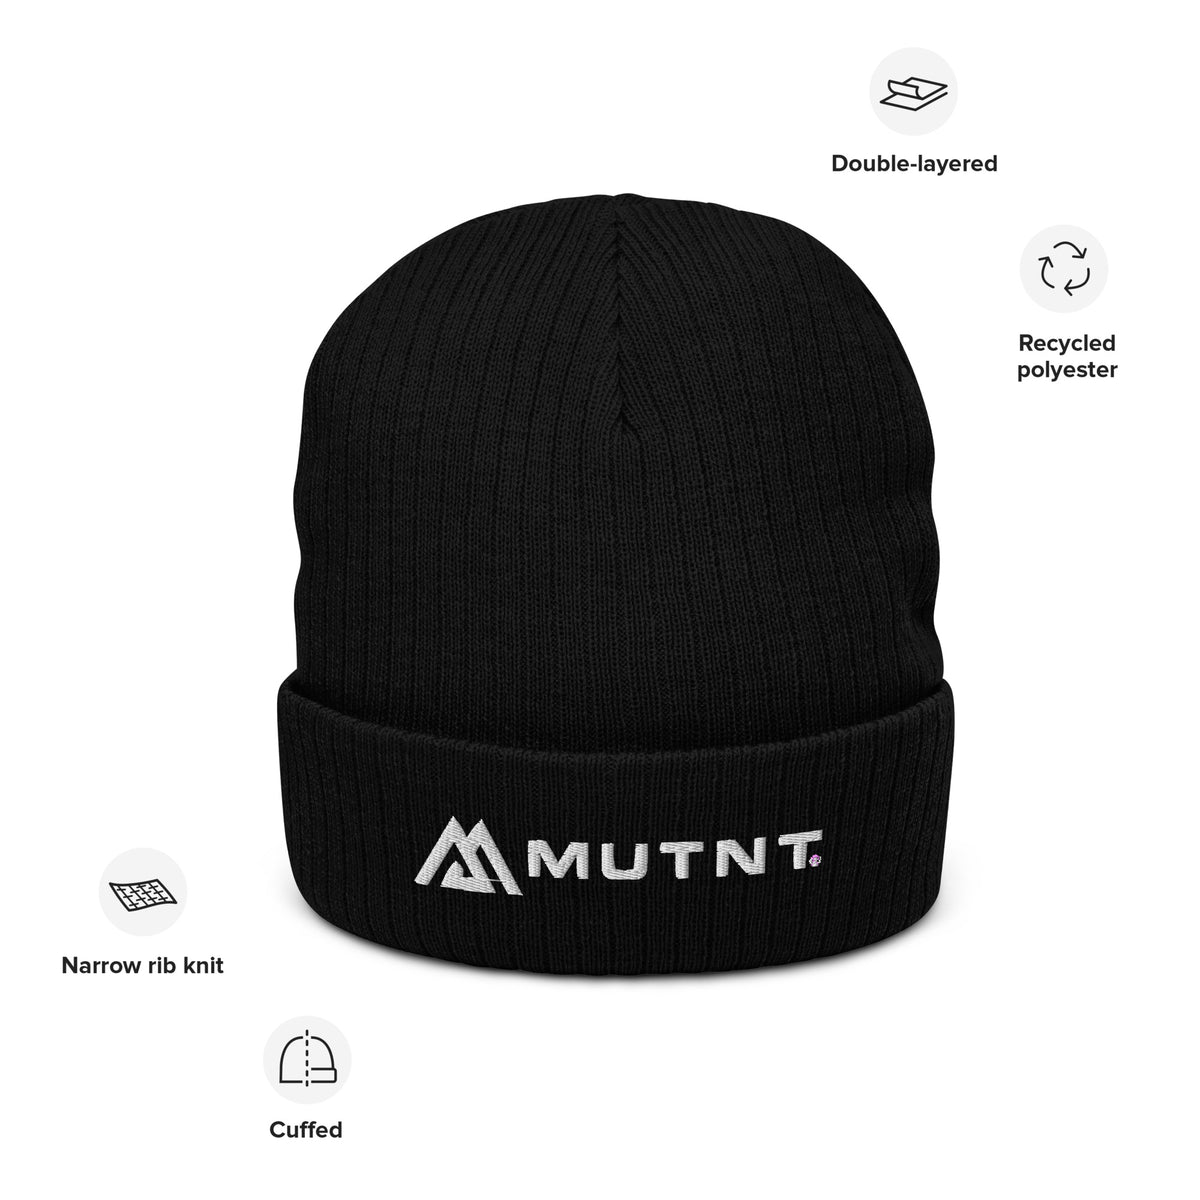 MUTNT Ribbed knit beanie